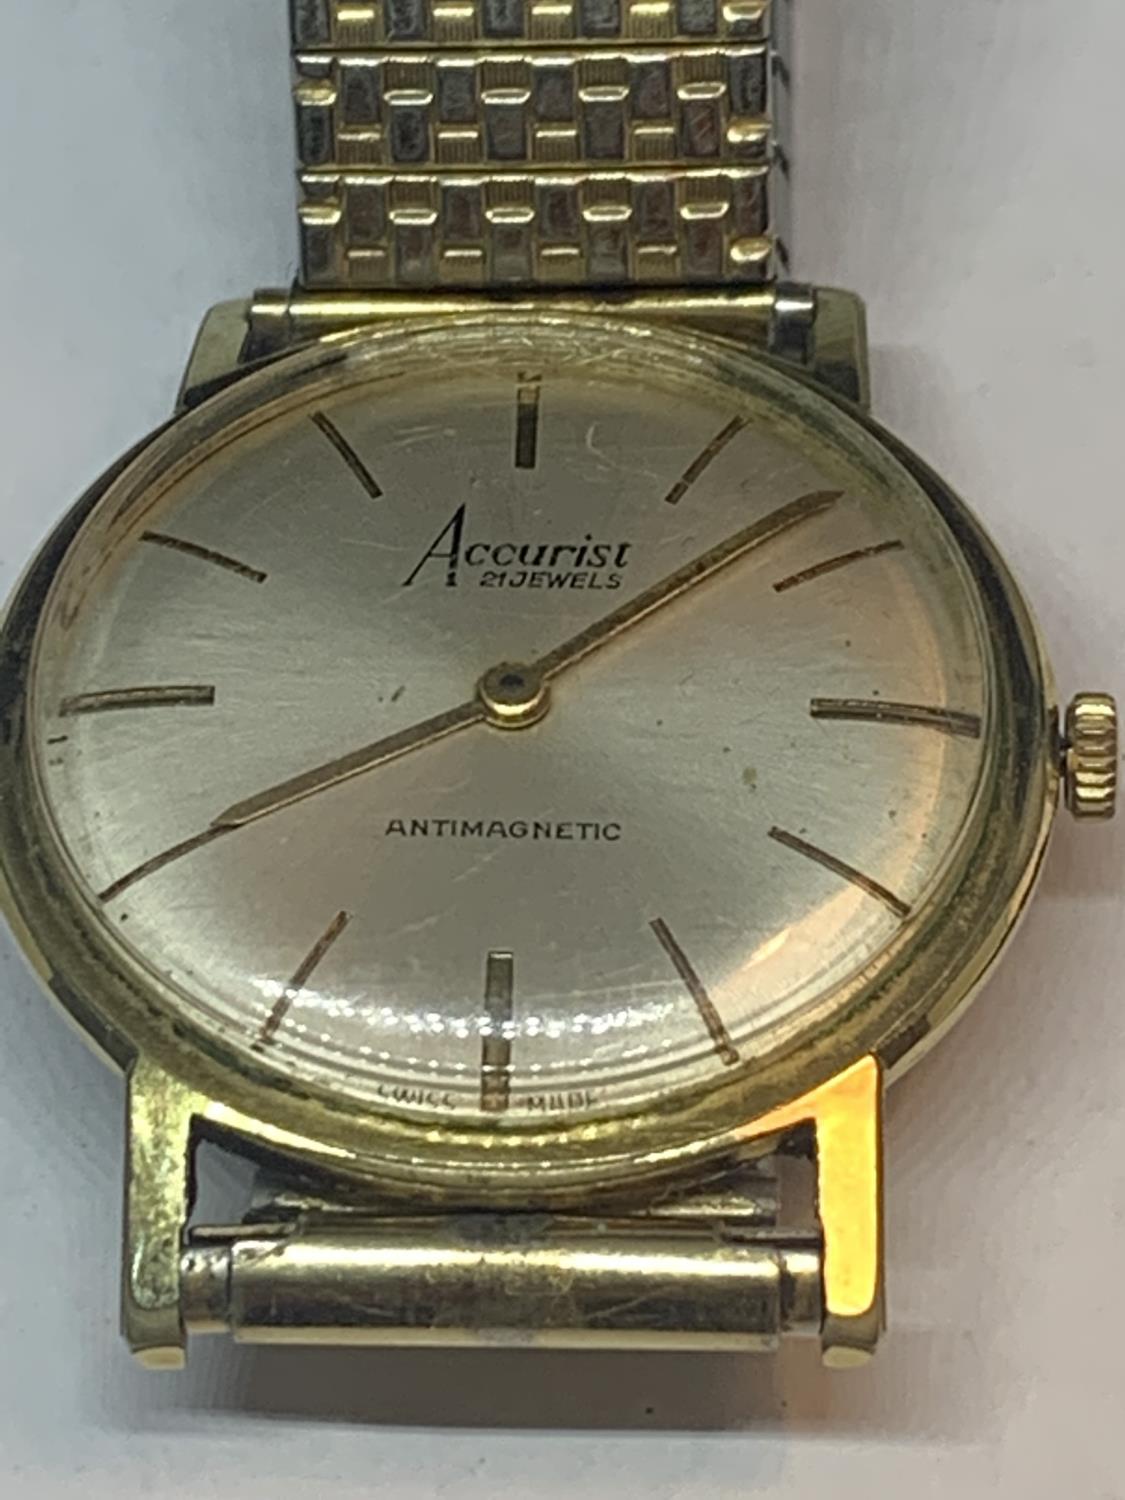 A VINTAGE ACCURIST 21 JEWELS ANTIMAGNETIC WRISTWATCH SEEN WORKING BUT NO WARRANTY - Image 2 of 3